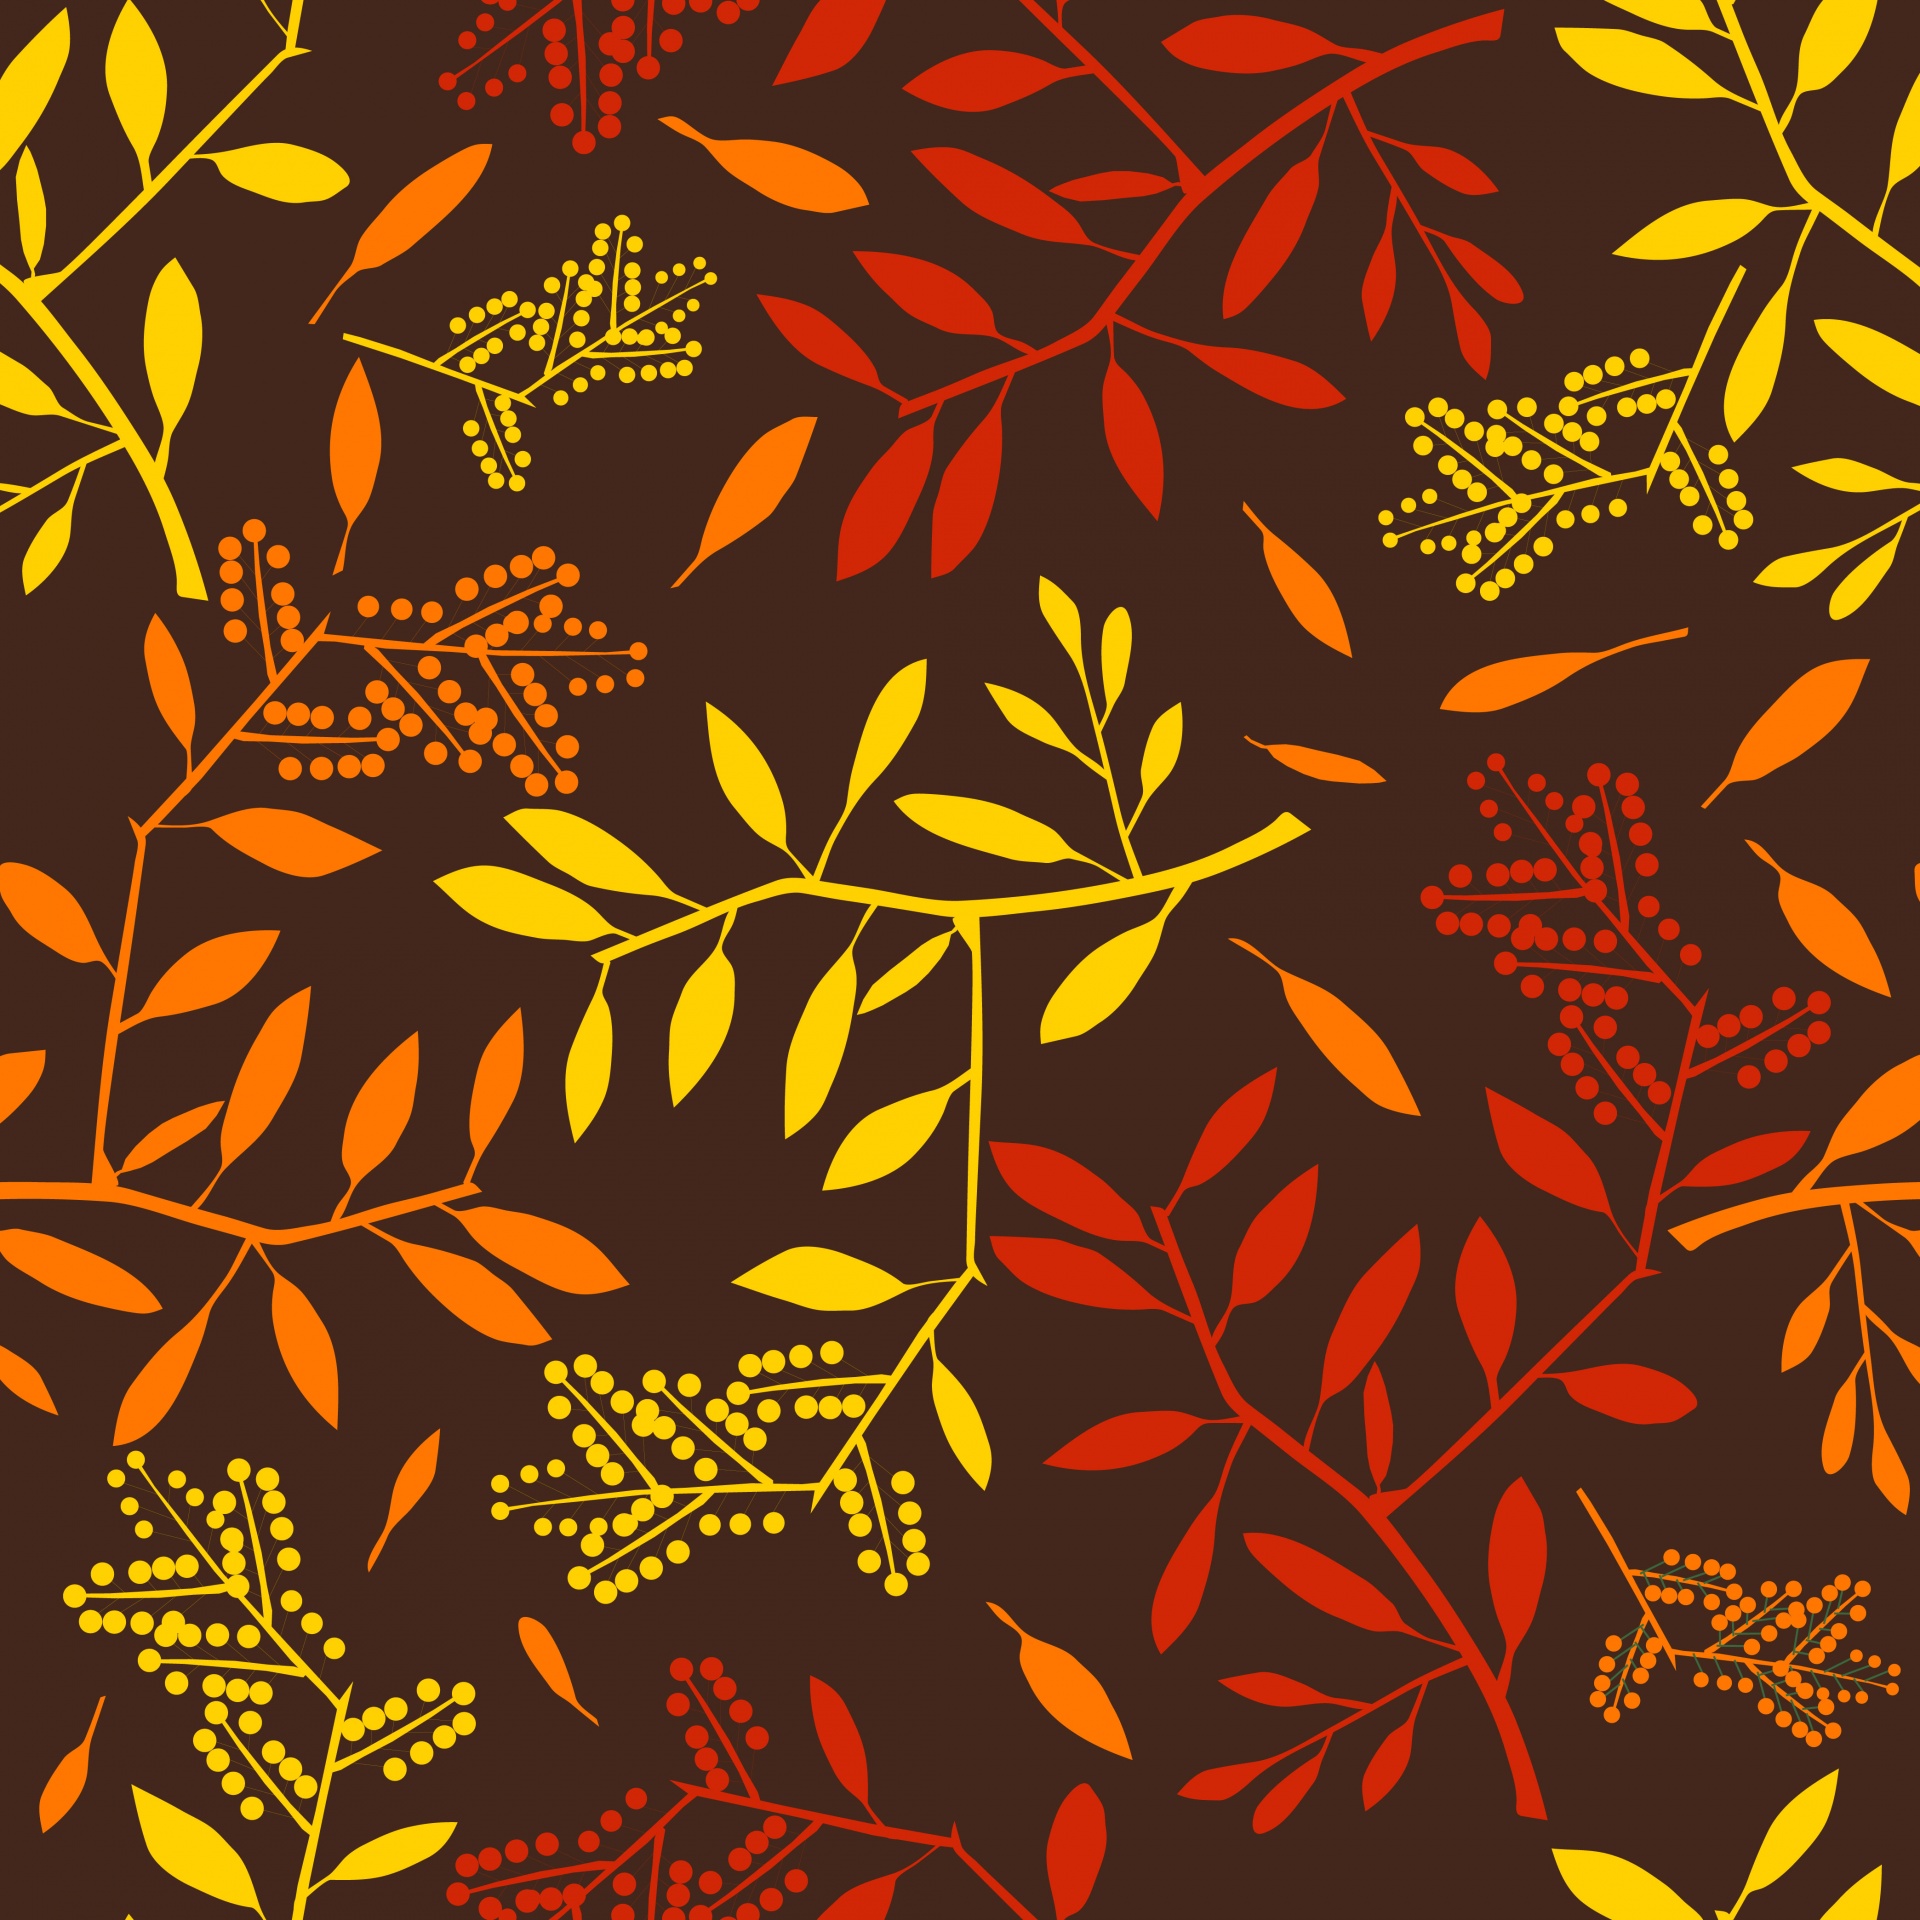 Autumn, fall leaves in orange, red and yellow with berries seamless, repeating pattern background wallpaper vector art illustration on dark brown background